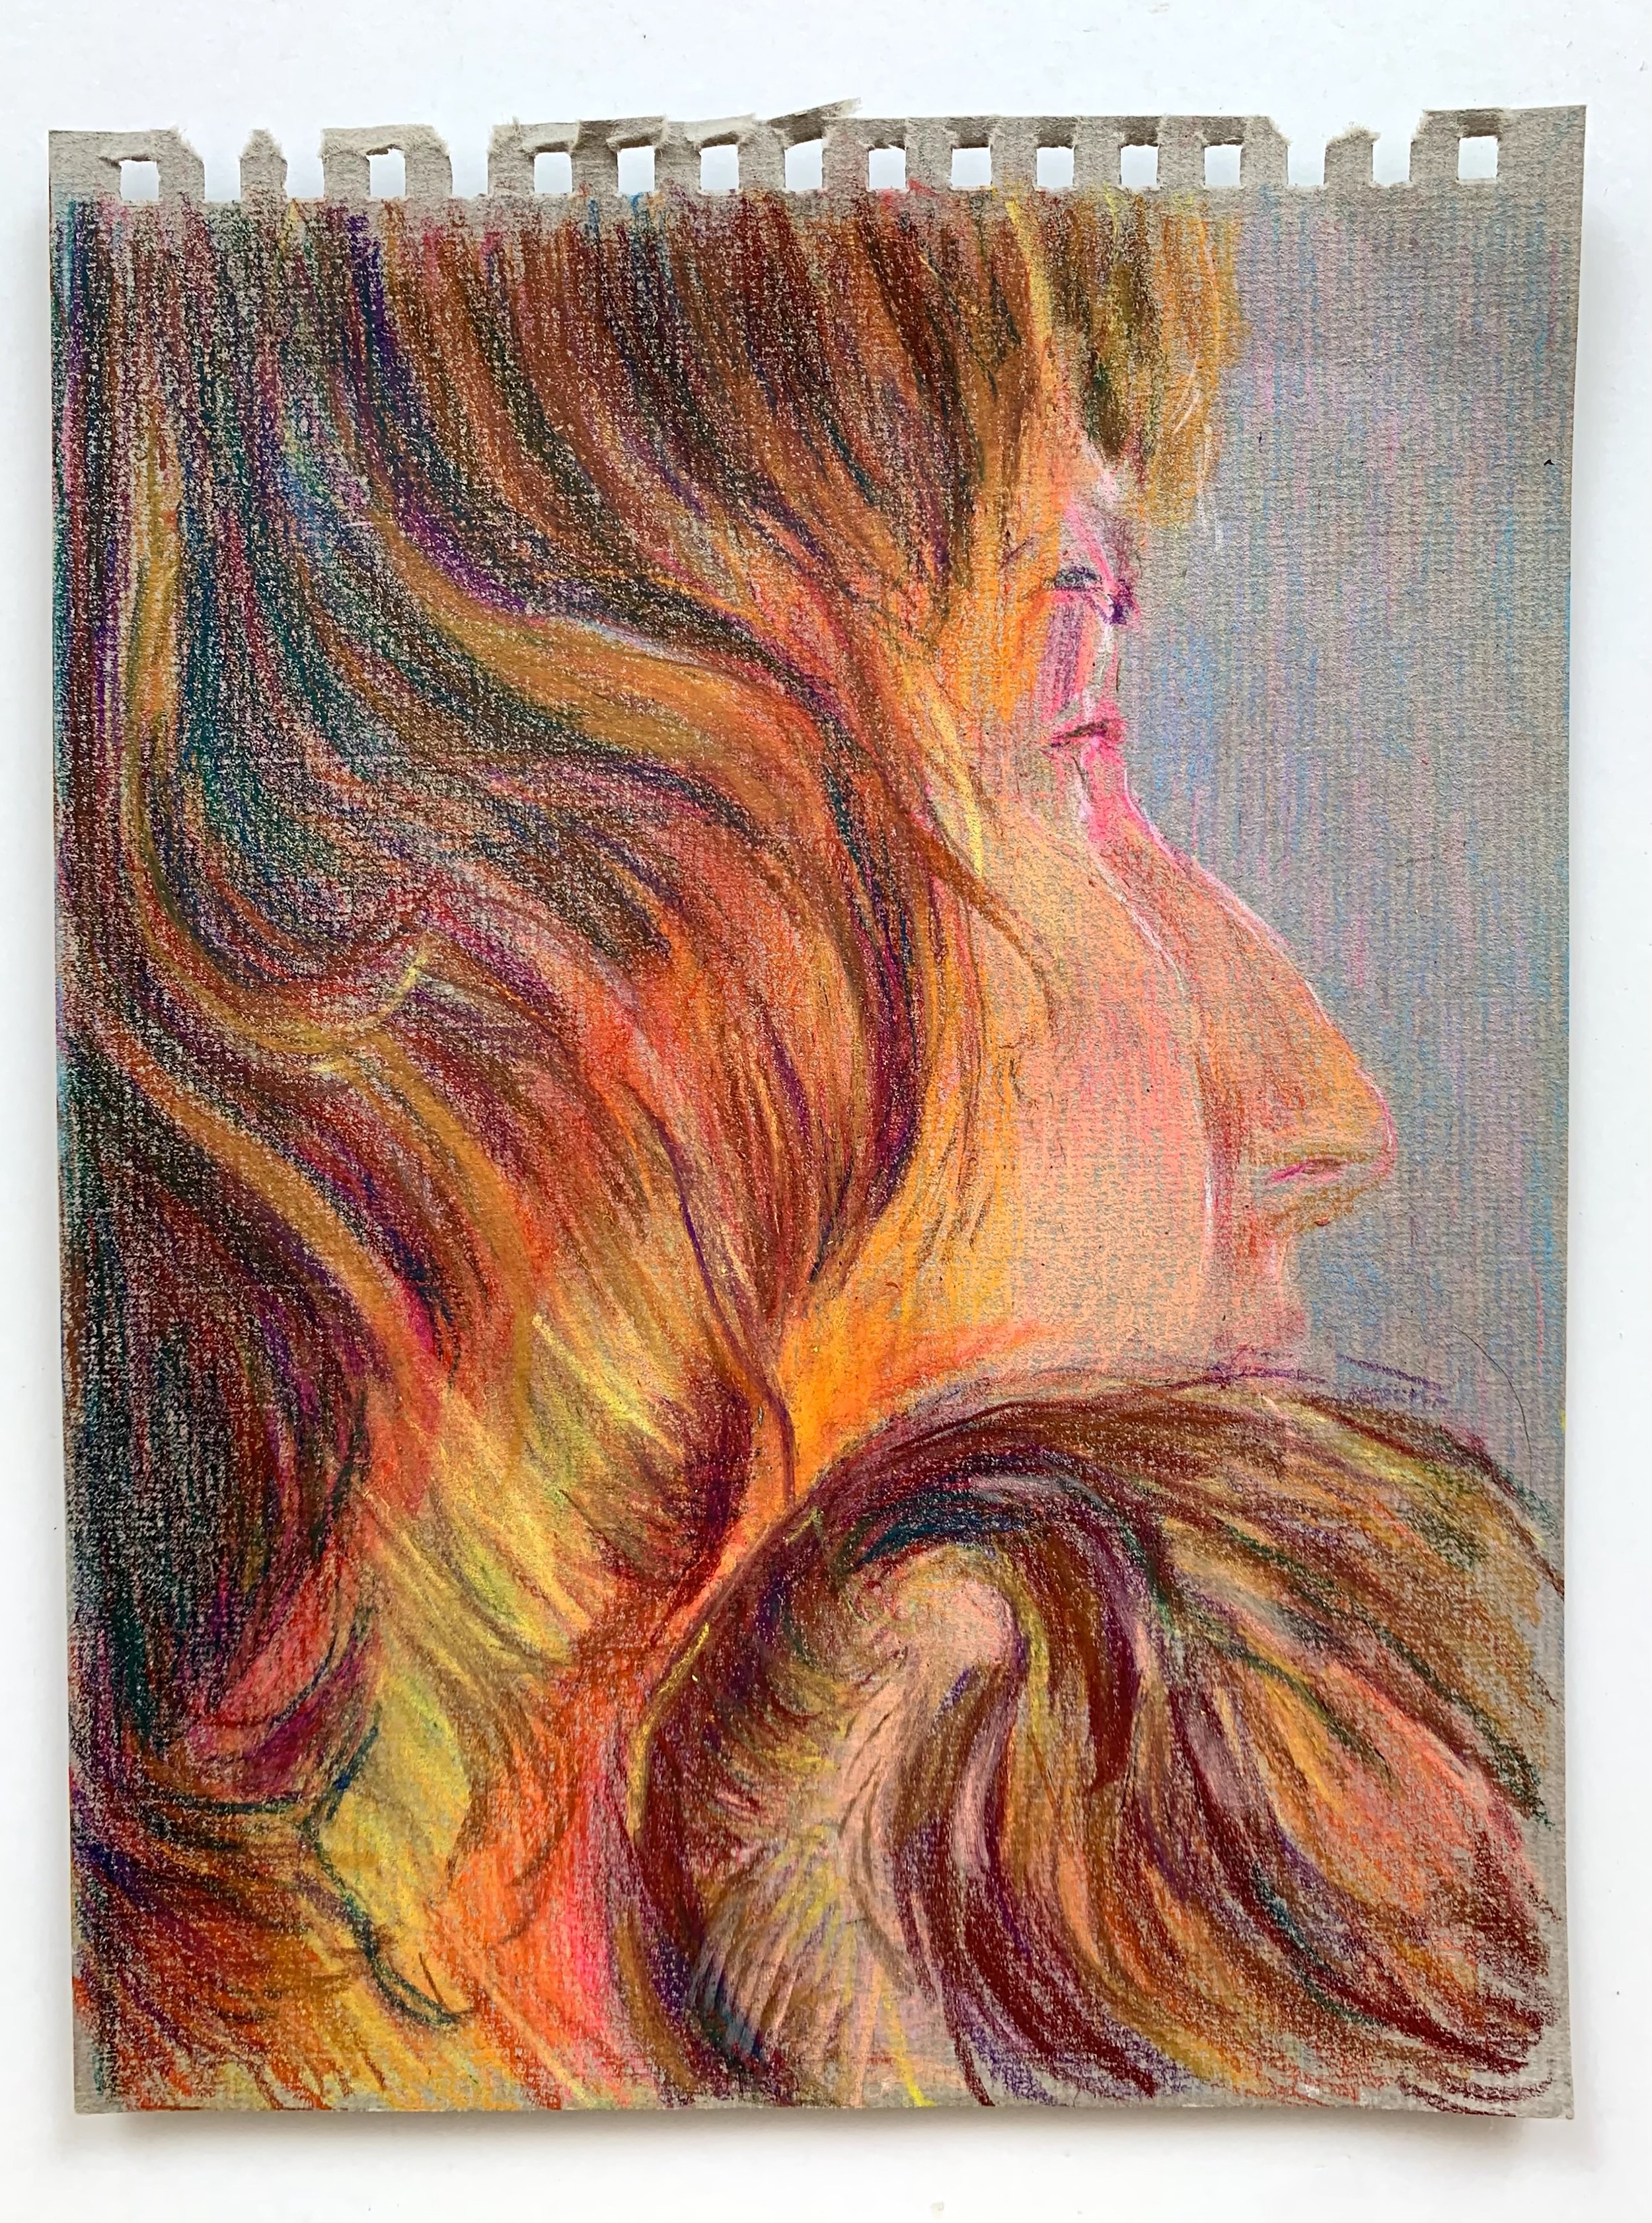 Heather Drayzen | S &amp; F, 12.5 x 10 inches / 31.8 x 25.4 cm, color pencil, neopastel crayon on toned paper, 2022 (Copy)